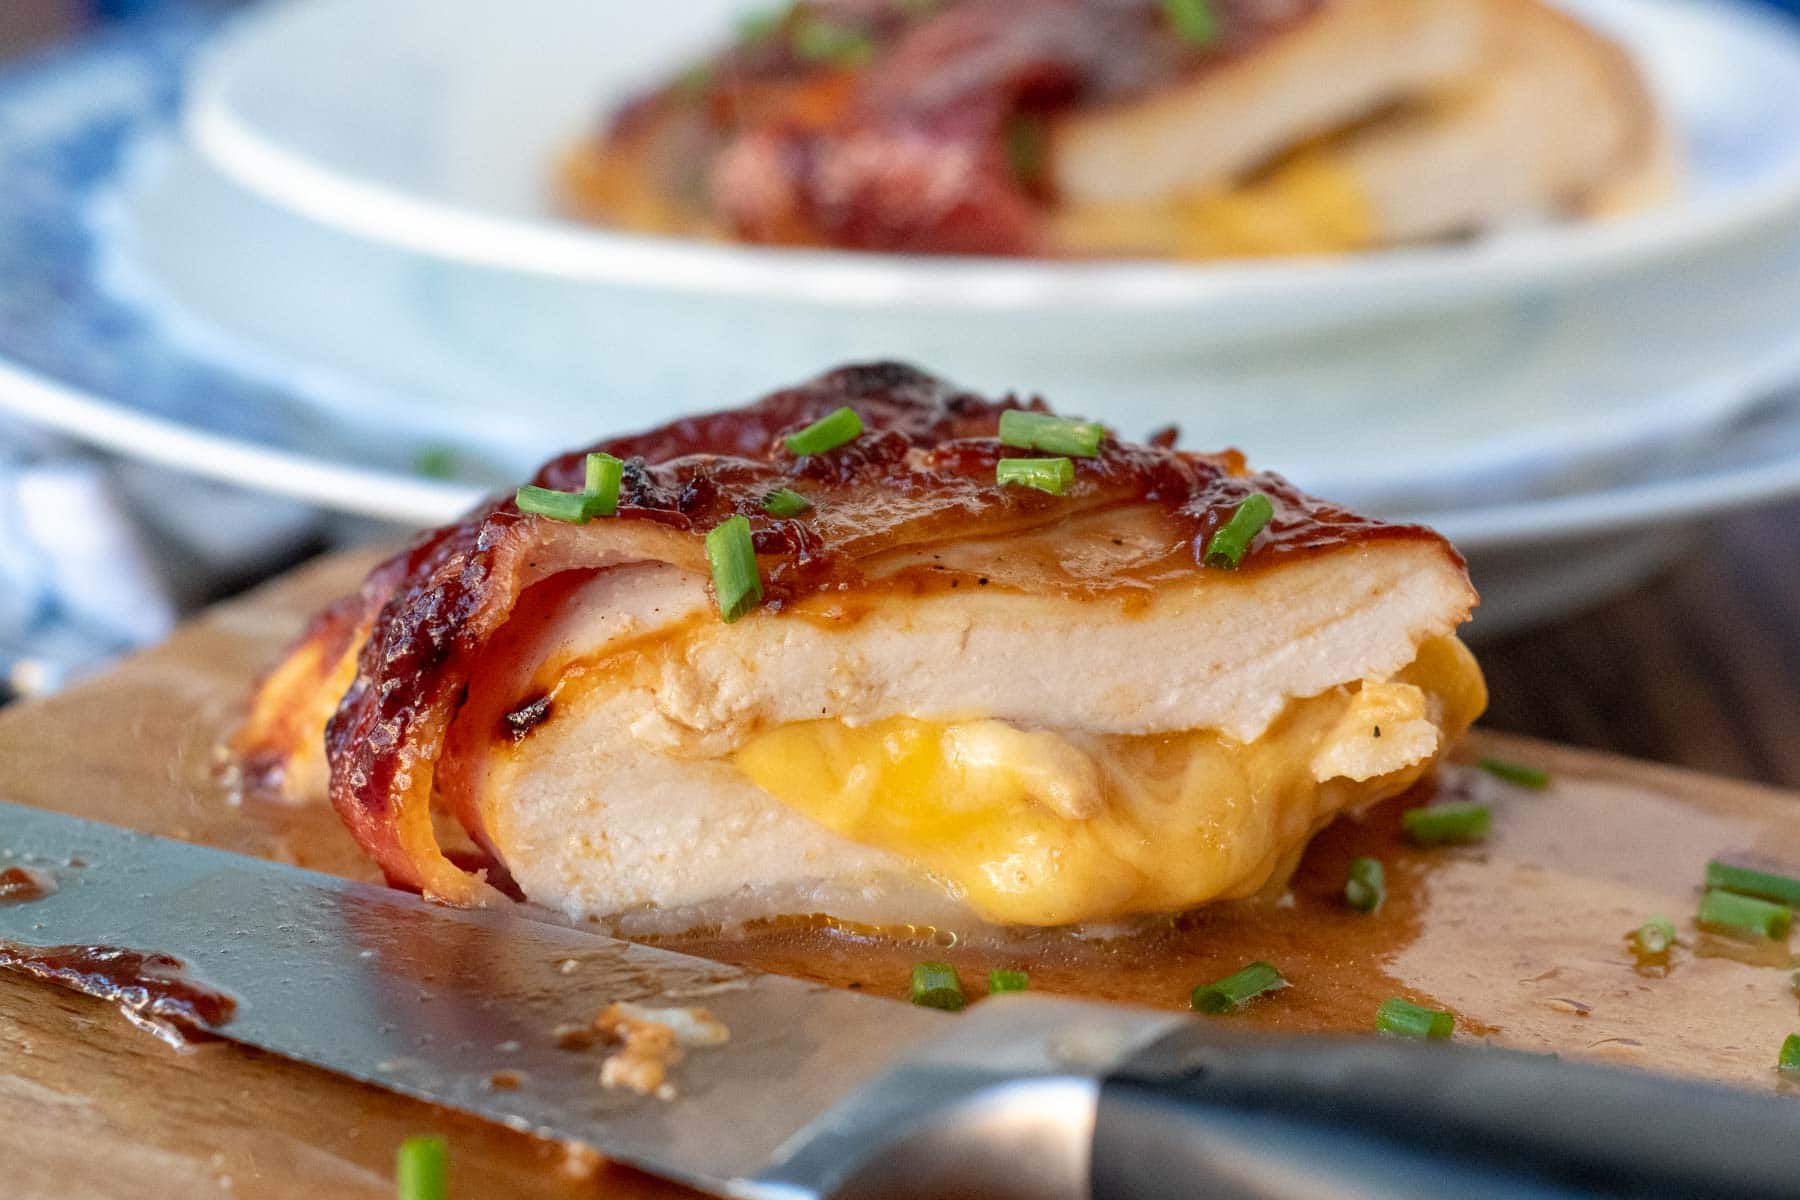 bacon wrapped chicken stuffed with cheese oozing out